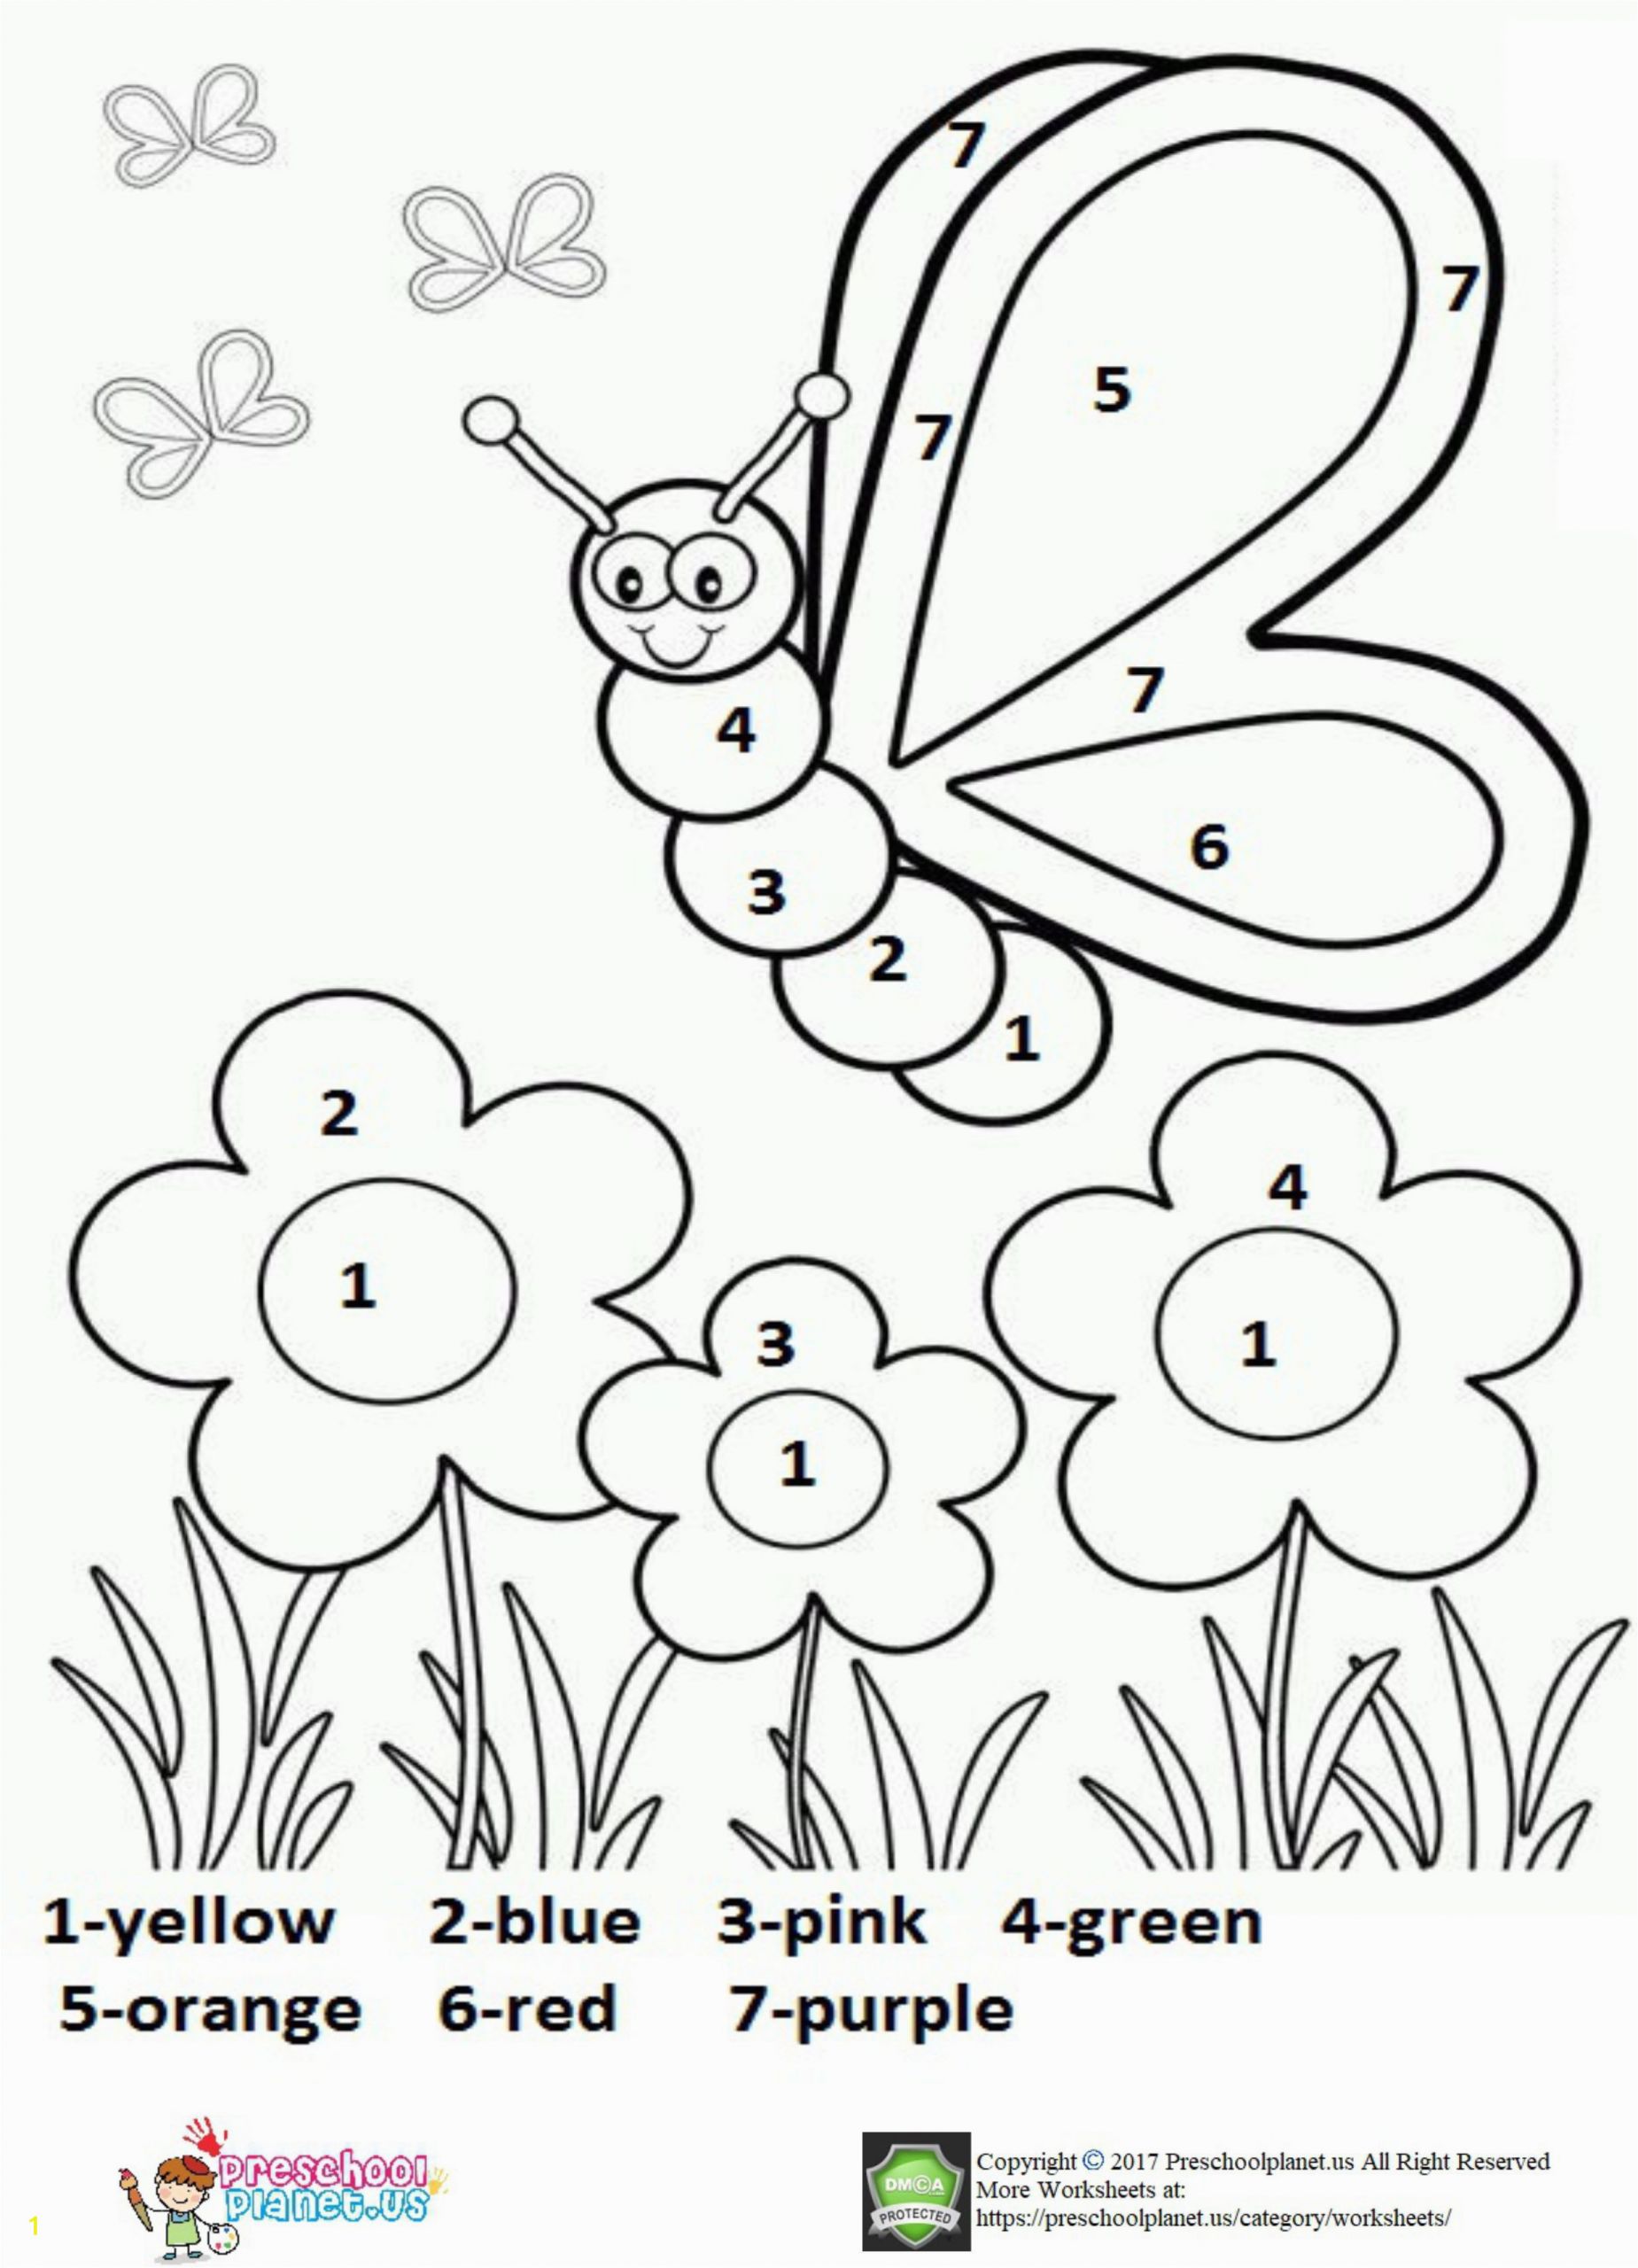 Easy Color by Number Coloring Pages Color by Number Spring Worksheet for Kids Here is Number